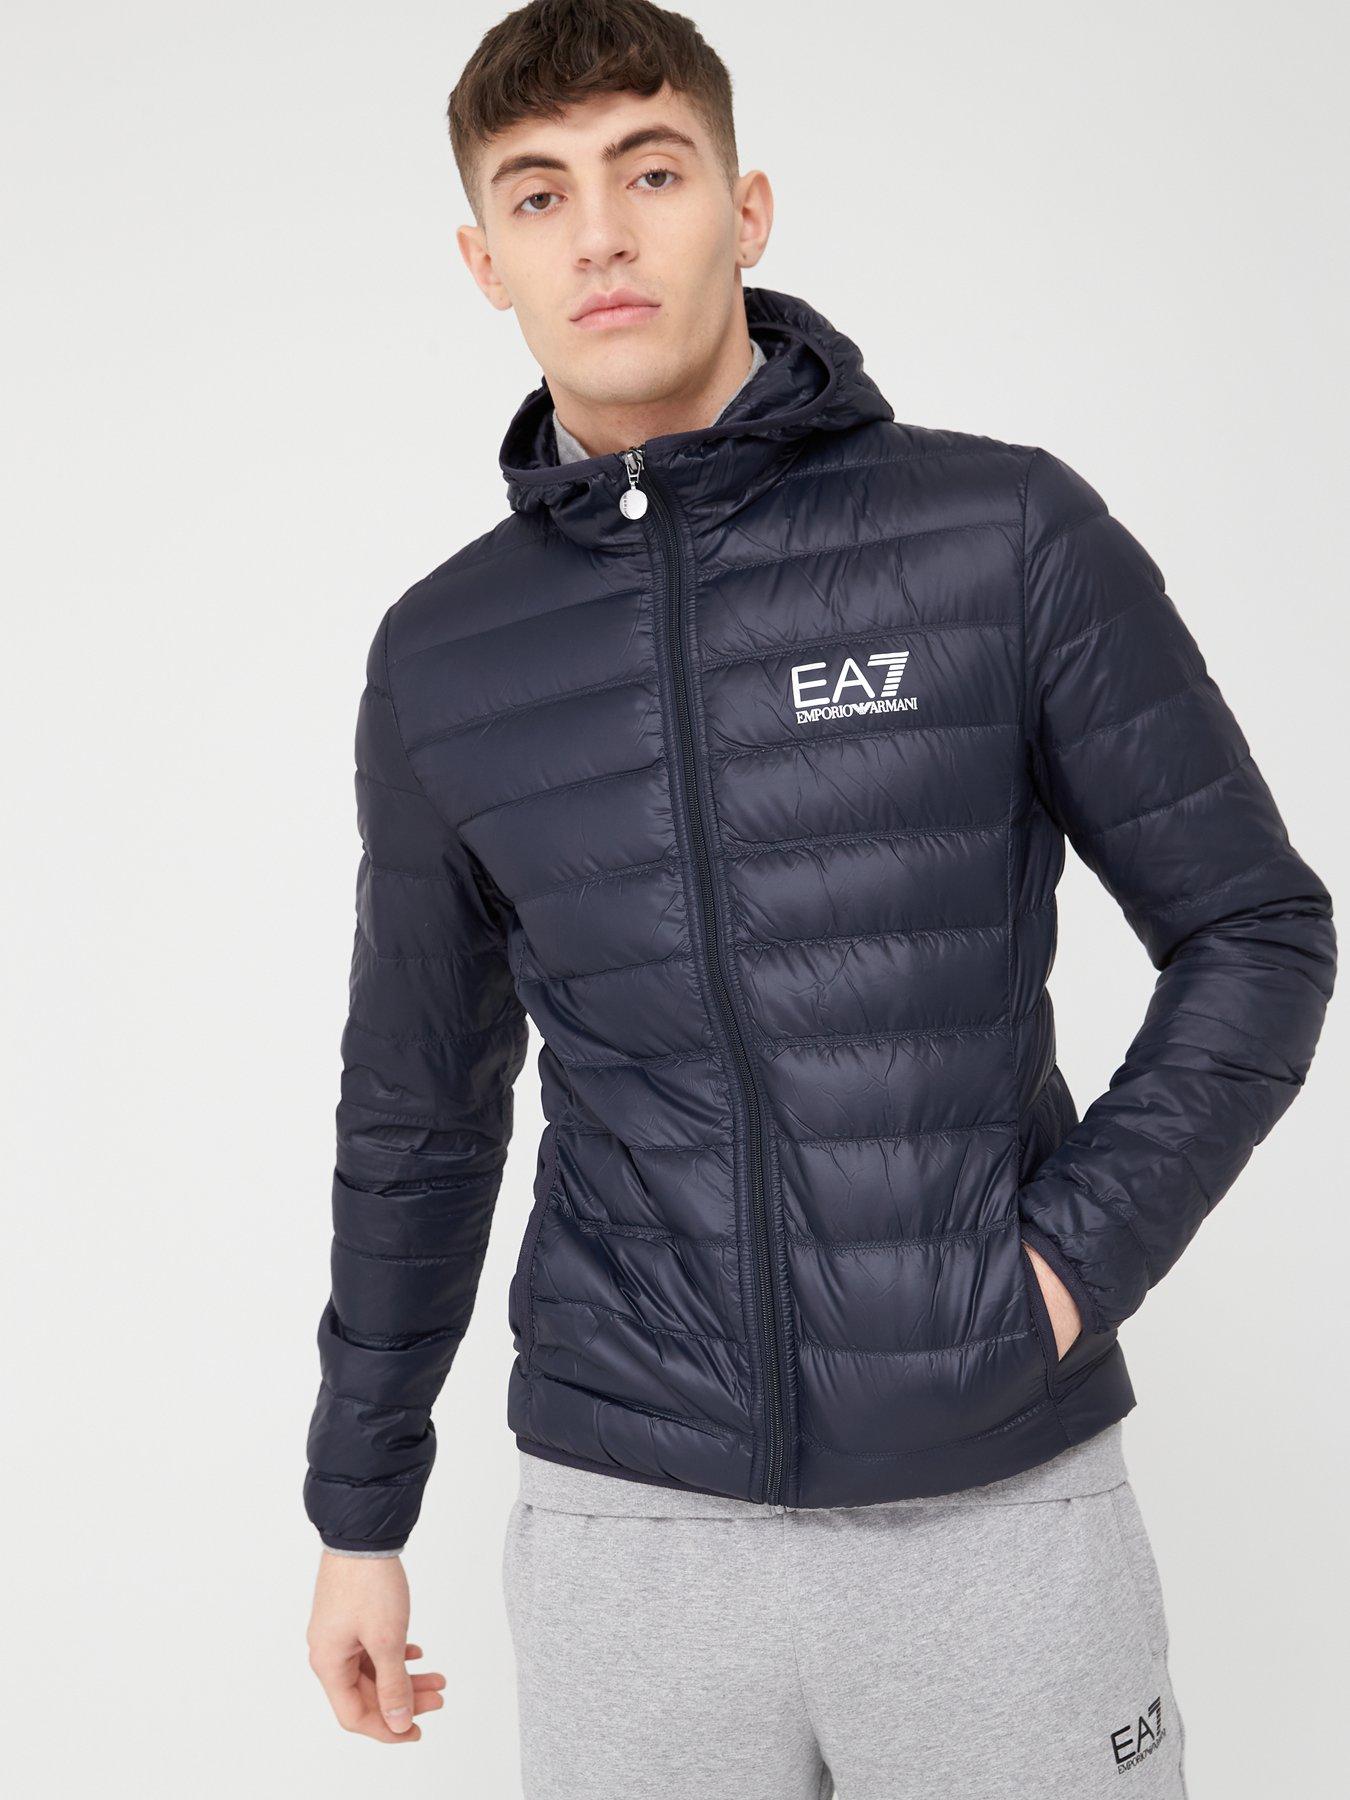 Quilted \u0026 Padded Jackets | Ea7 emporio 